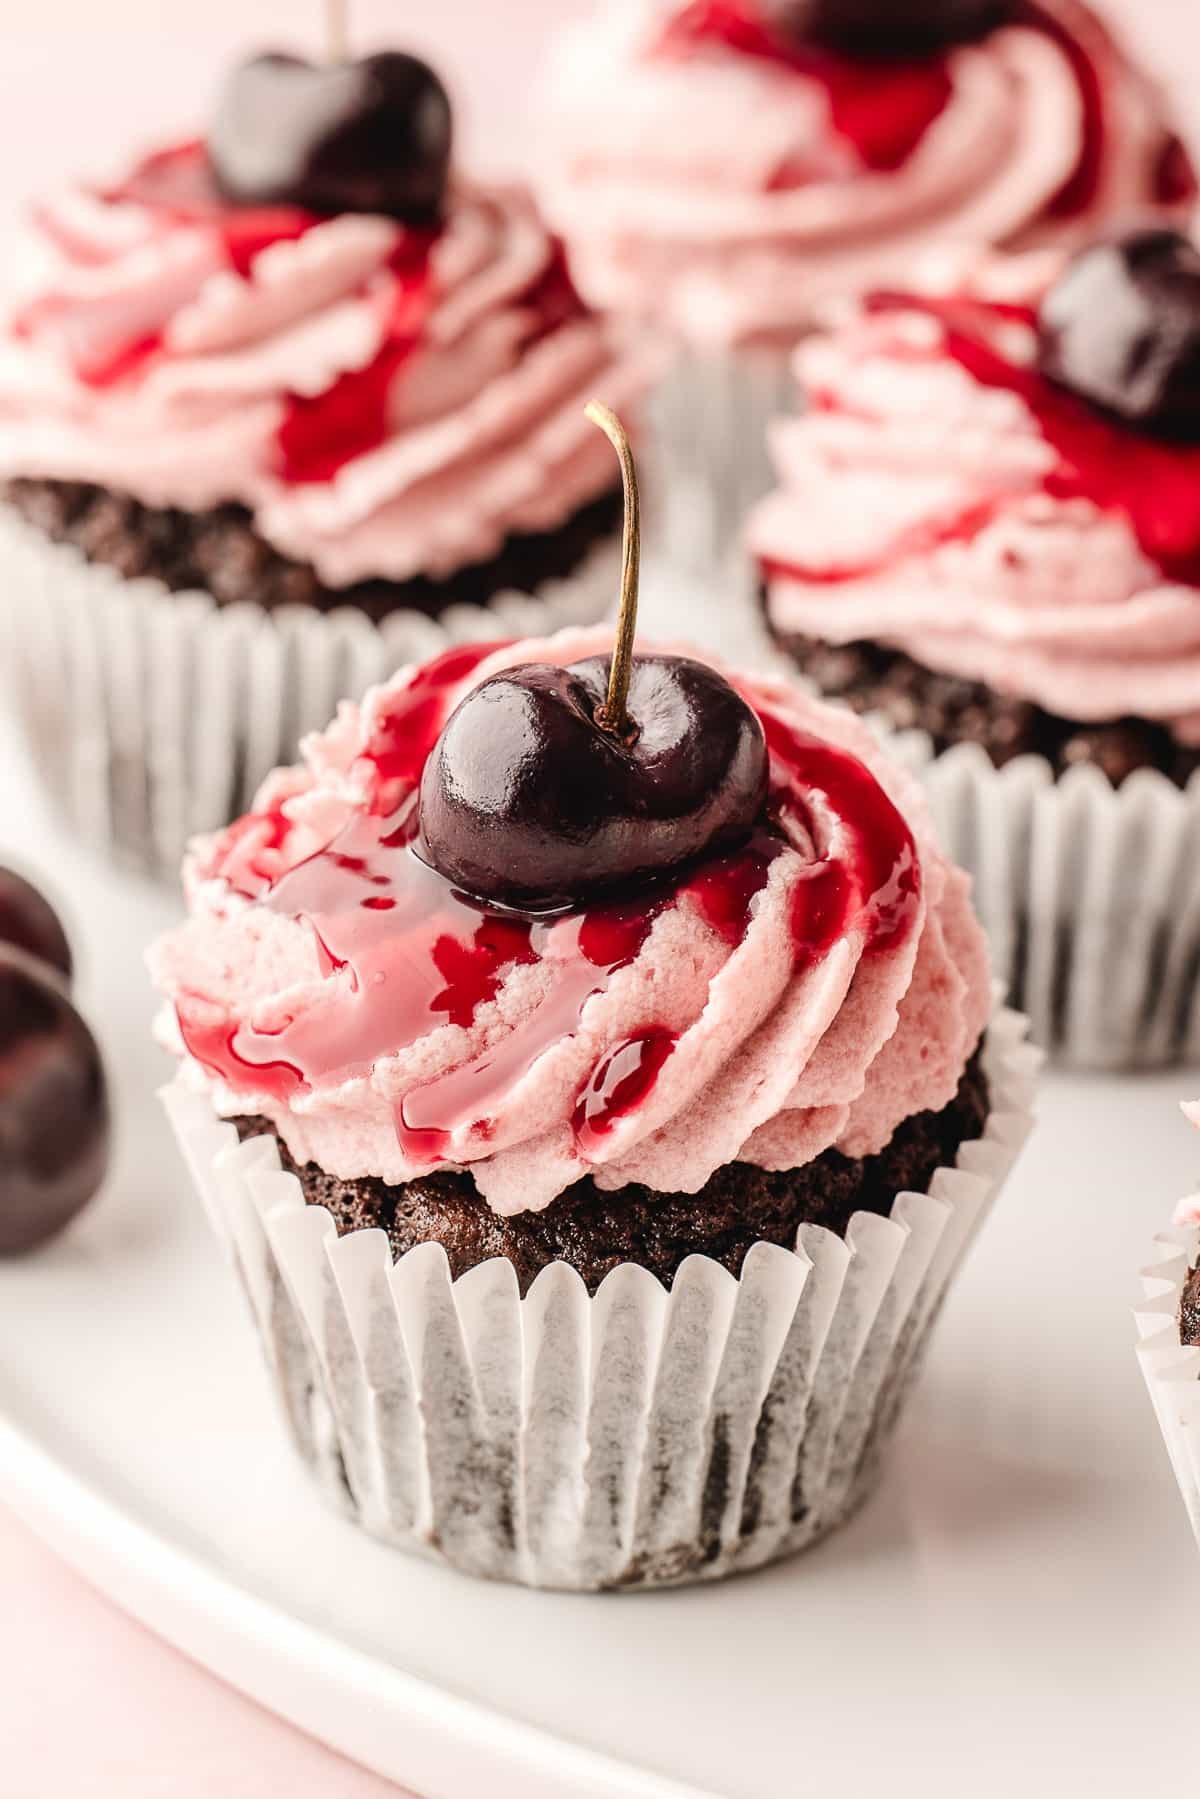 Black forest cupcakes on a serving plate topped with fresh cherries.